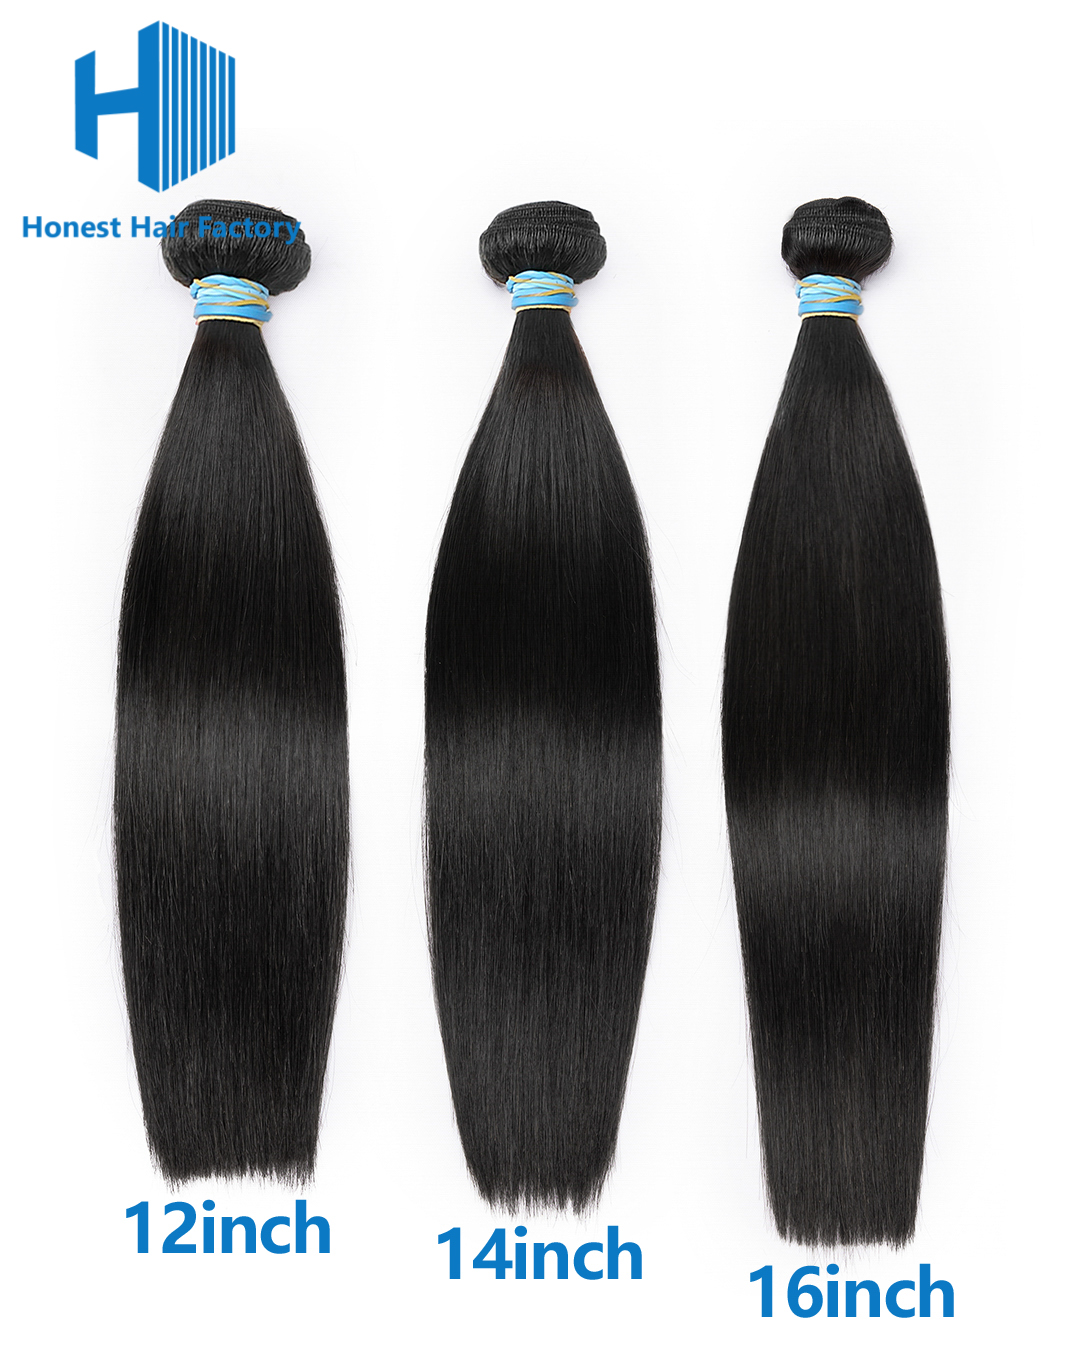 Limited Time! Free Shipping! Blue Band Hair Bundle Deals (Straight)